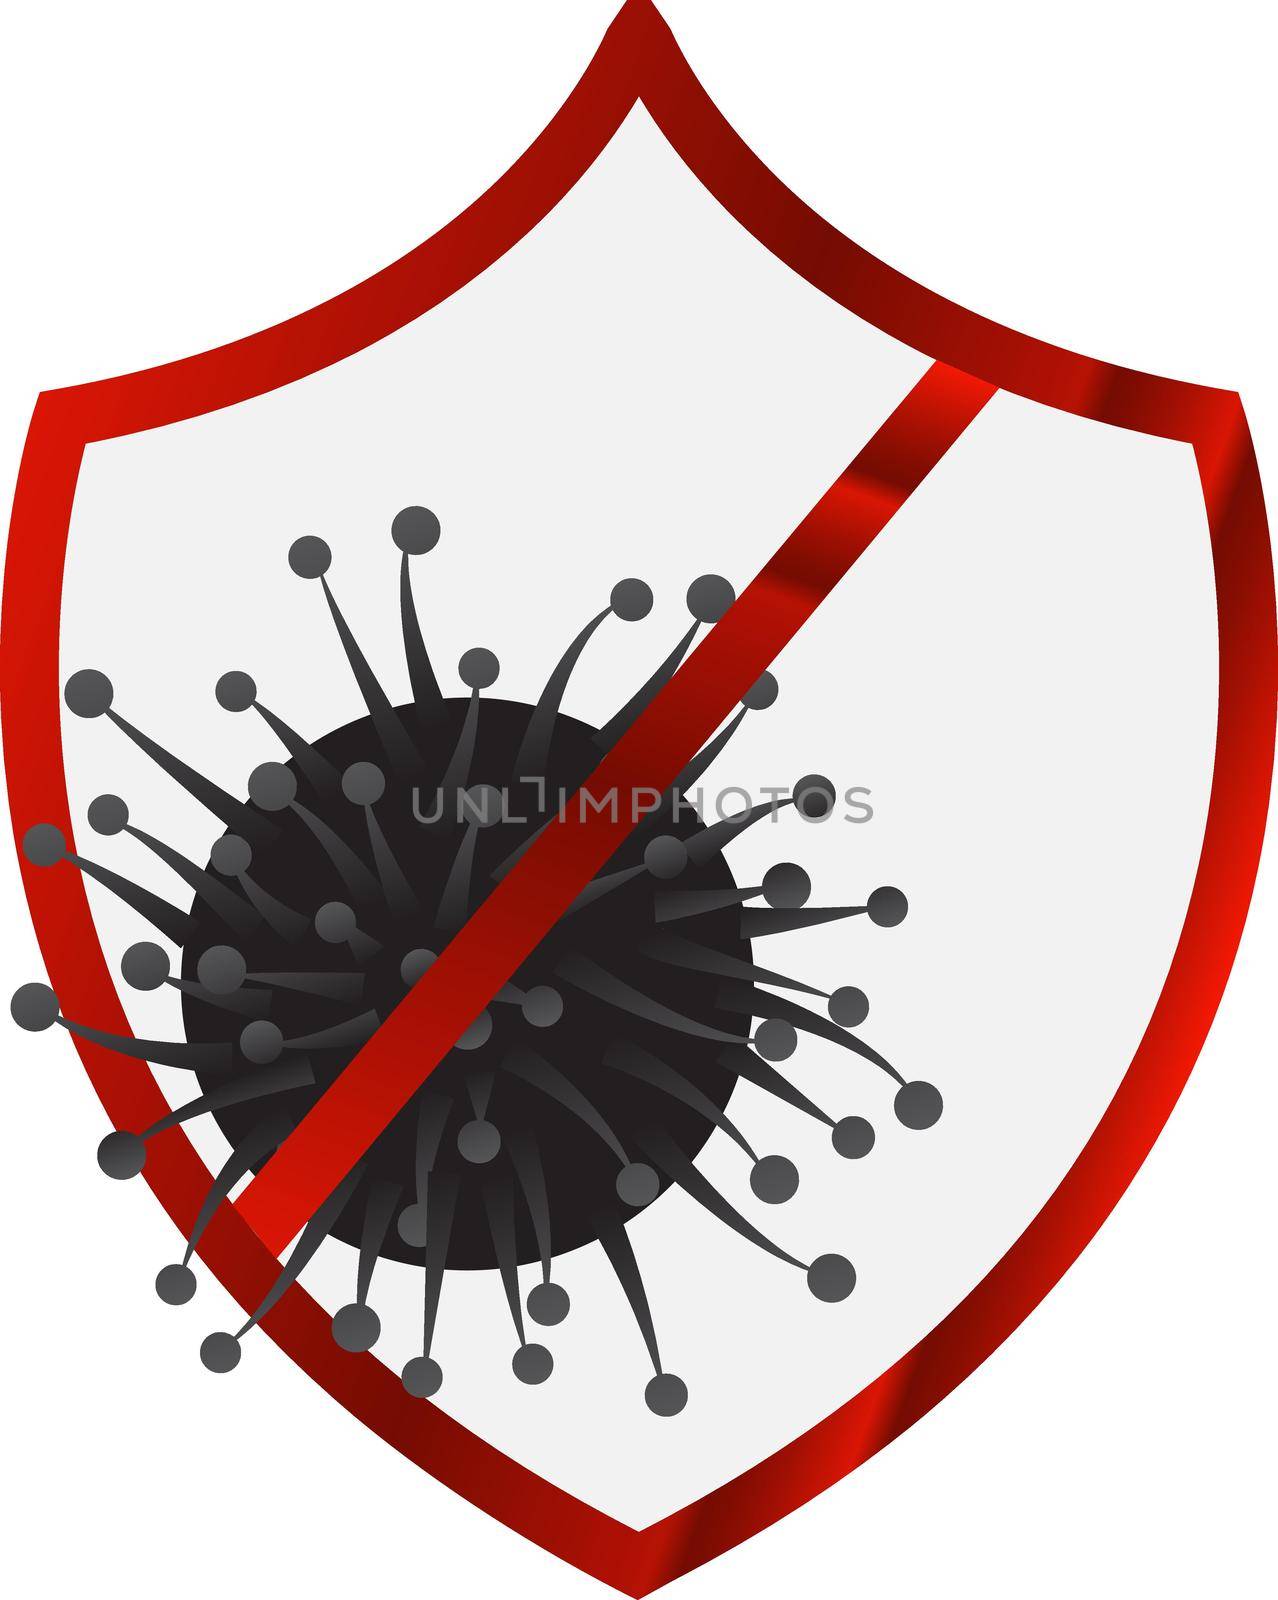 Antivirus shield sign vector illustration on a white background isolated